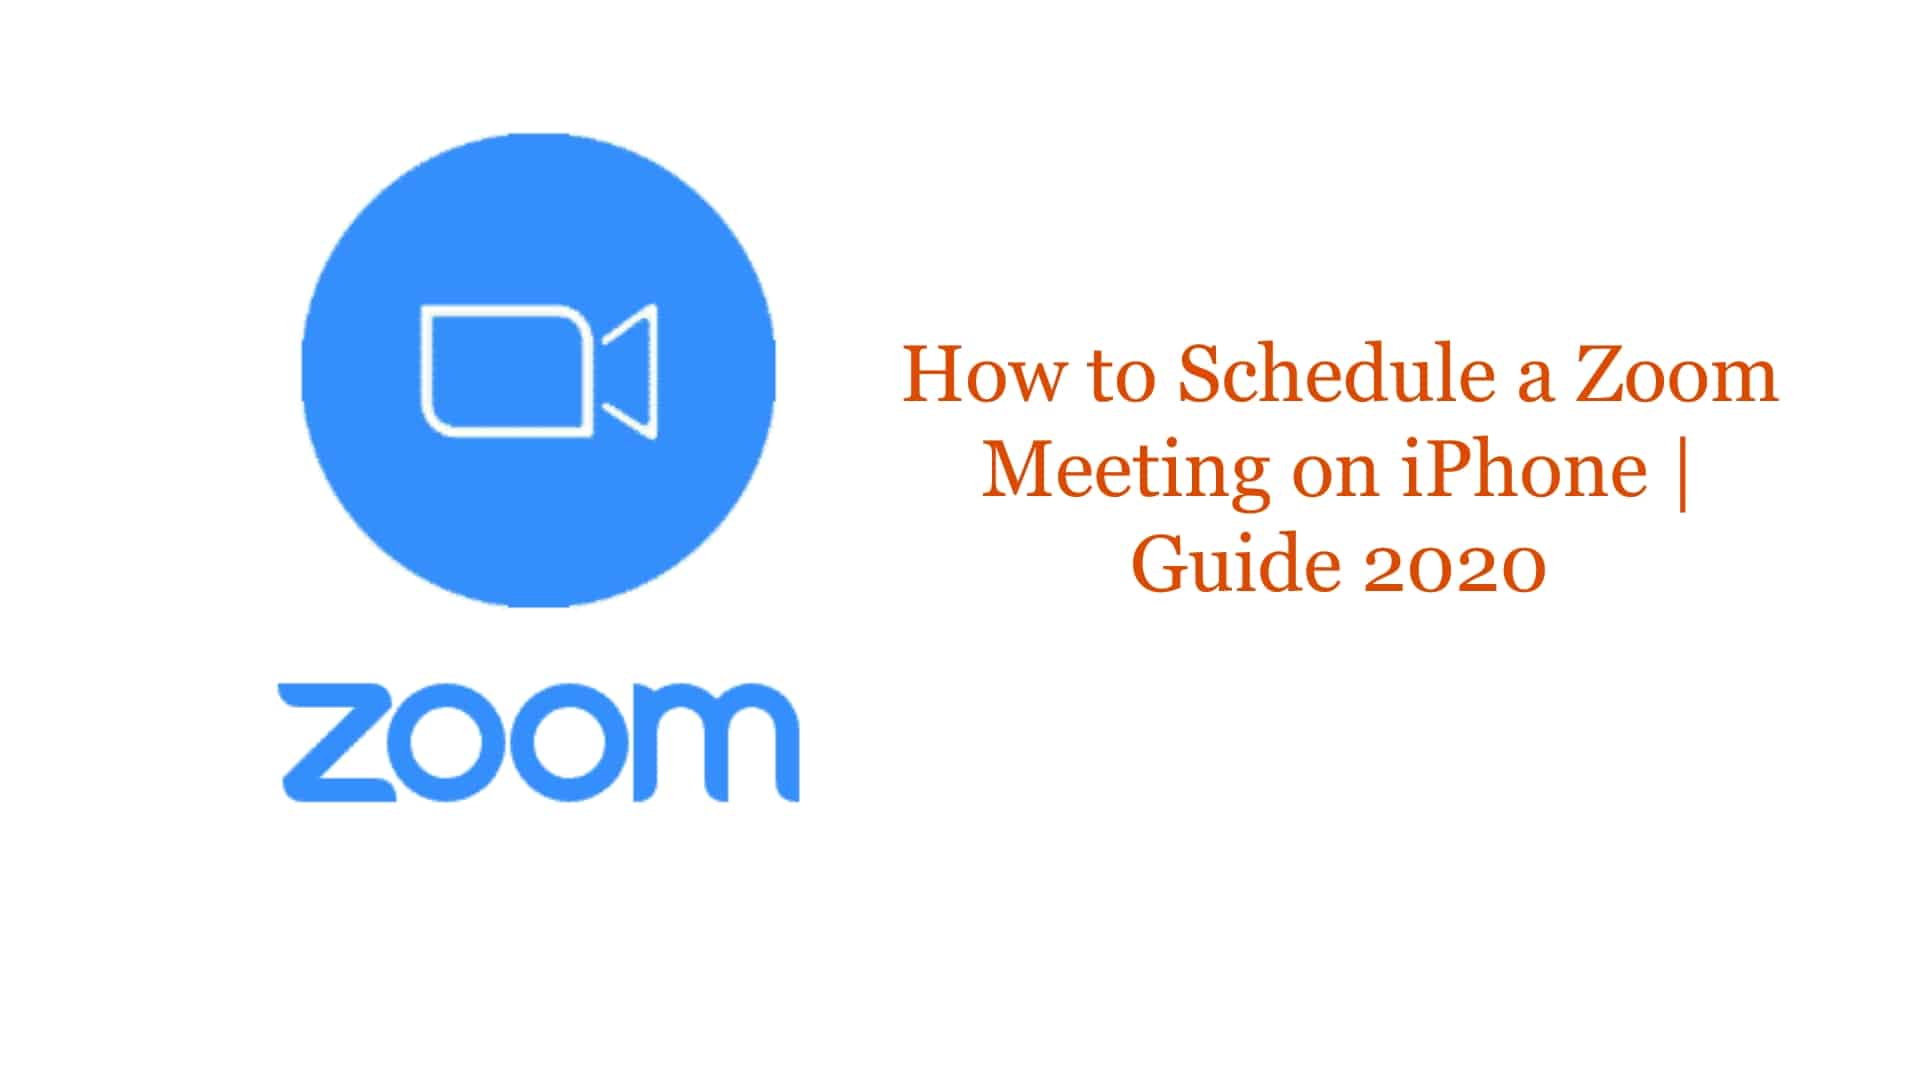 How to Schedule a Zoom Meeting on iPhone Guide 2021